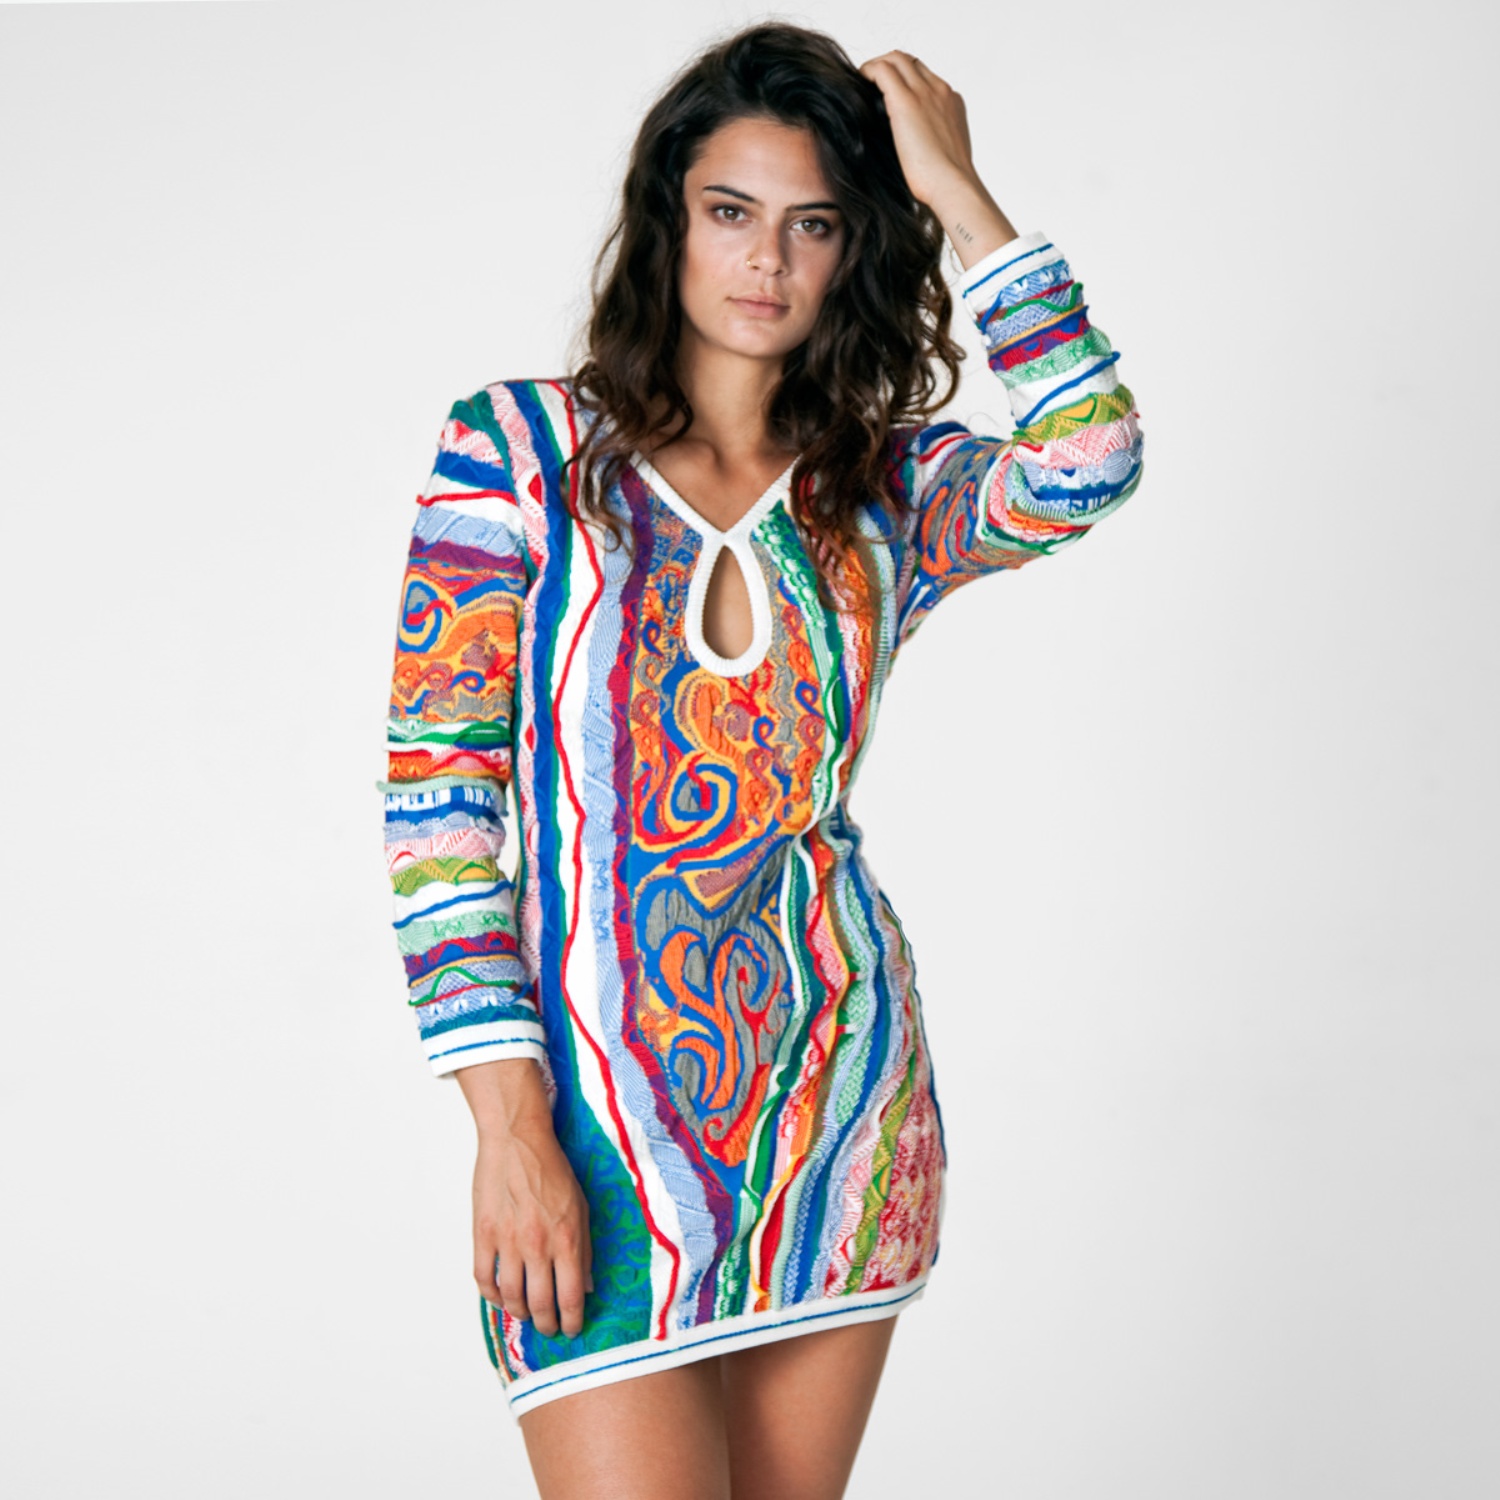 Coogi ready to hypnotize with two sexy knit dresses for fall 2017